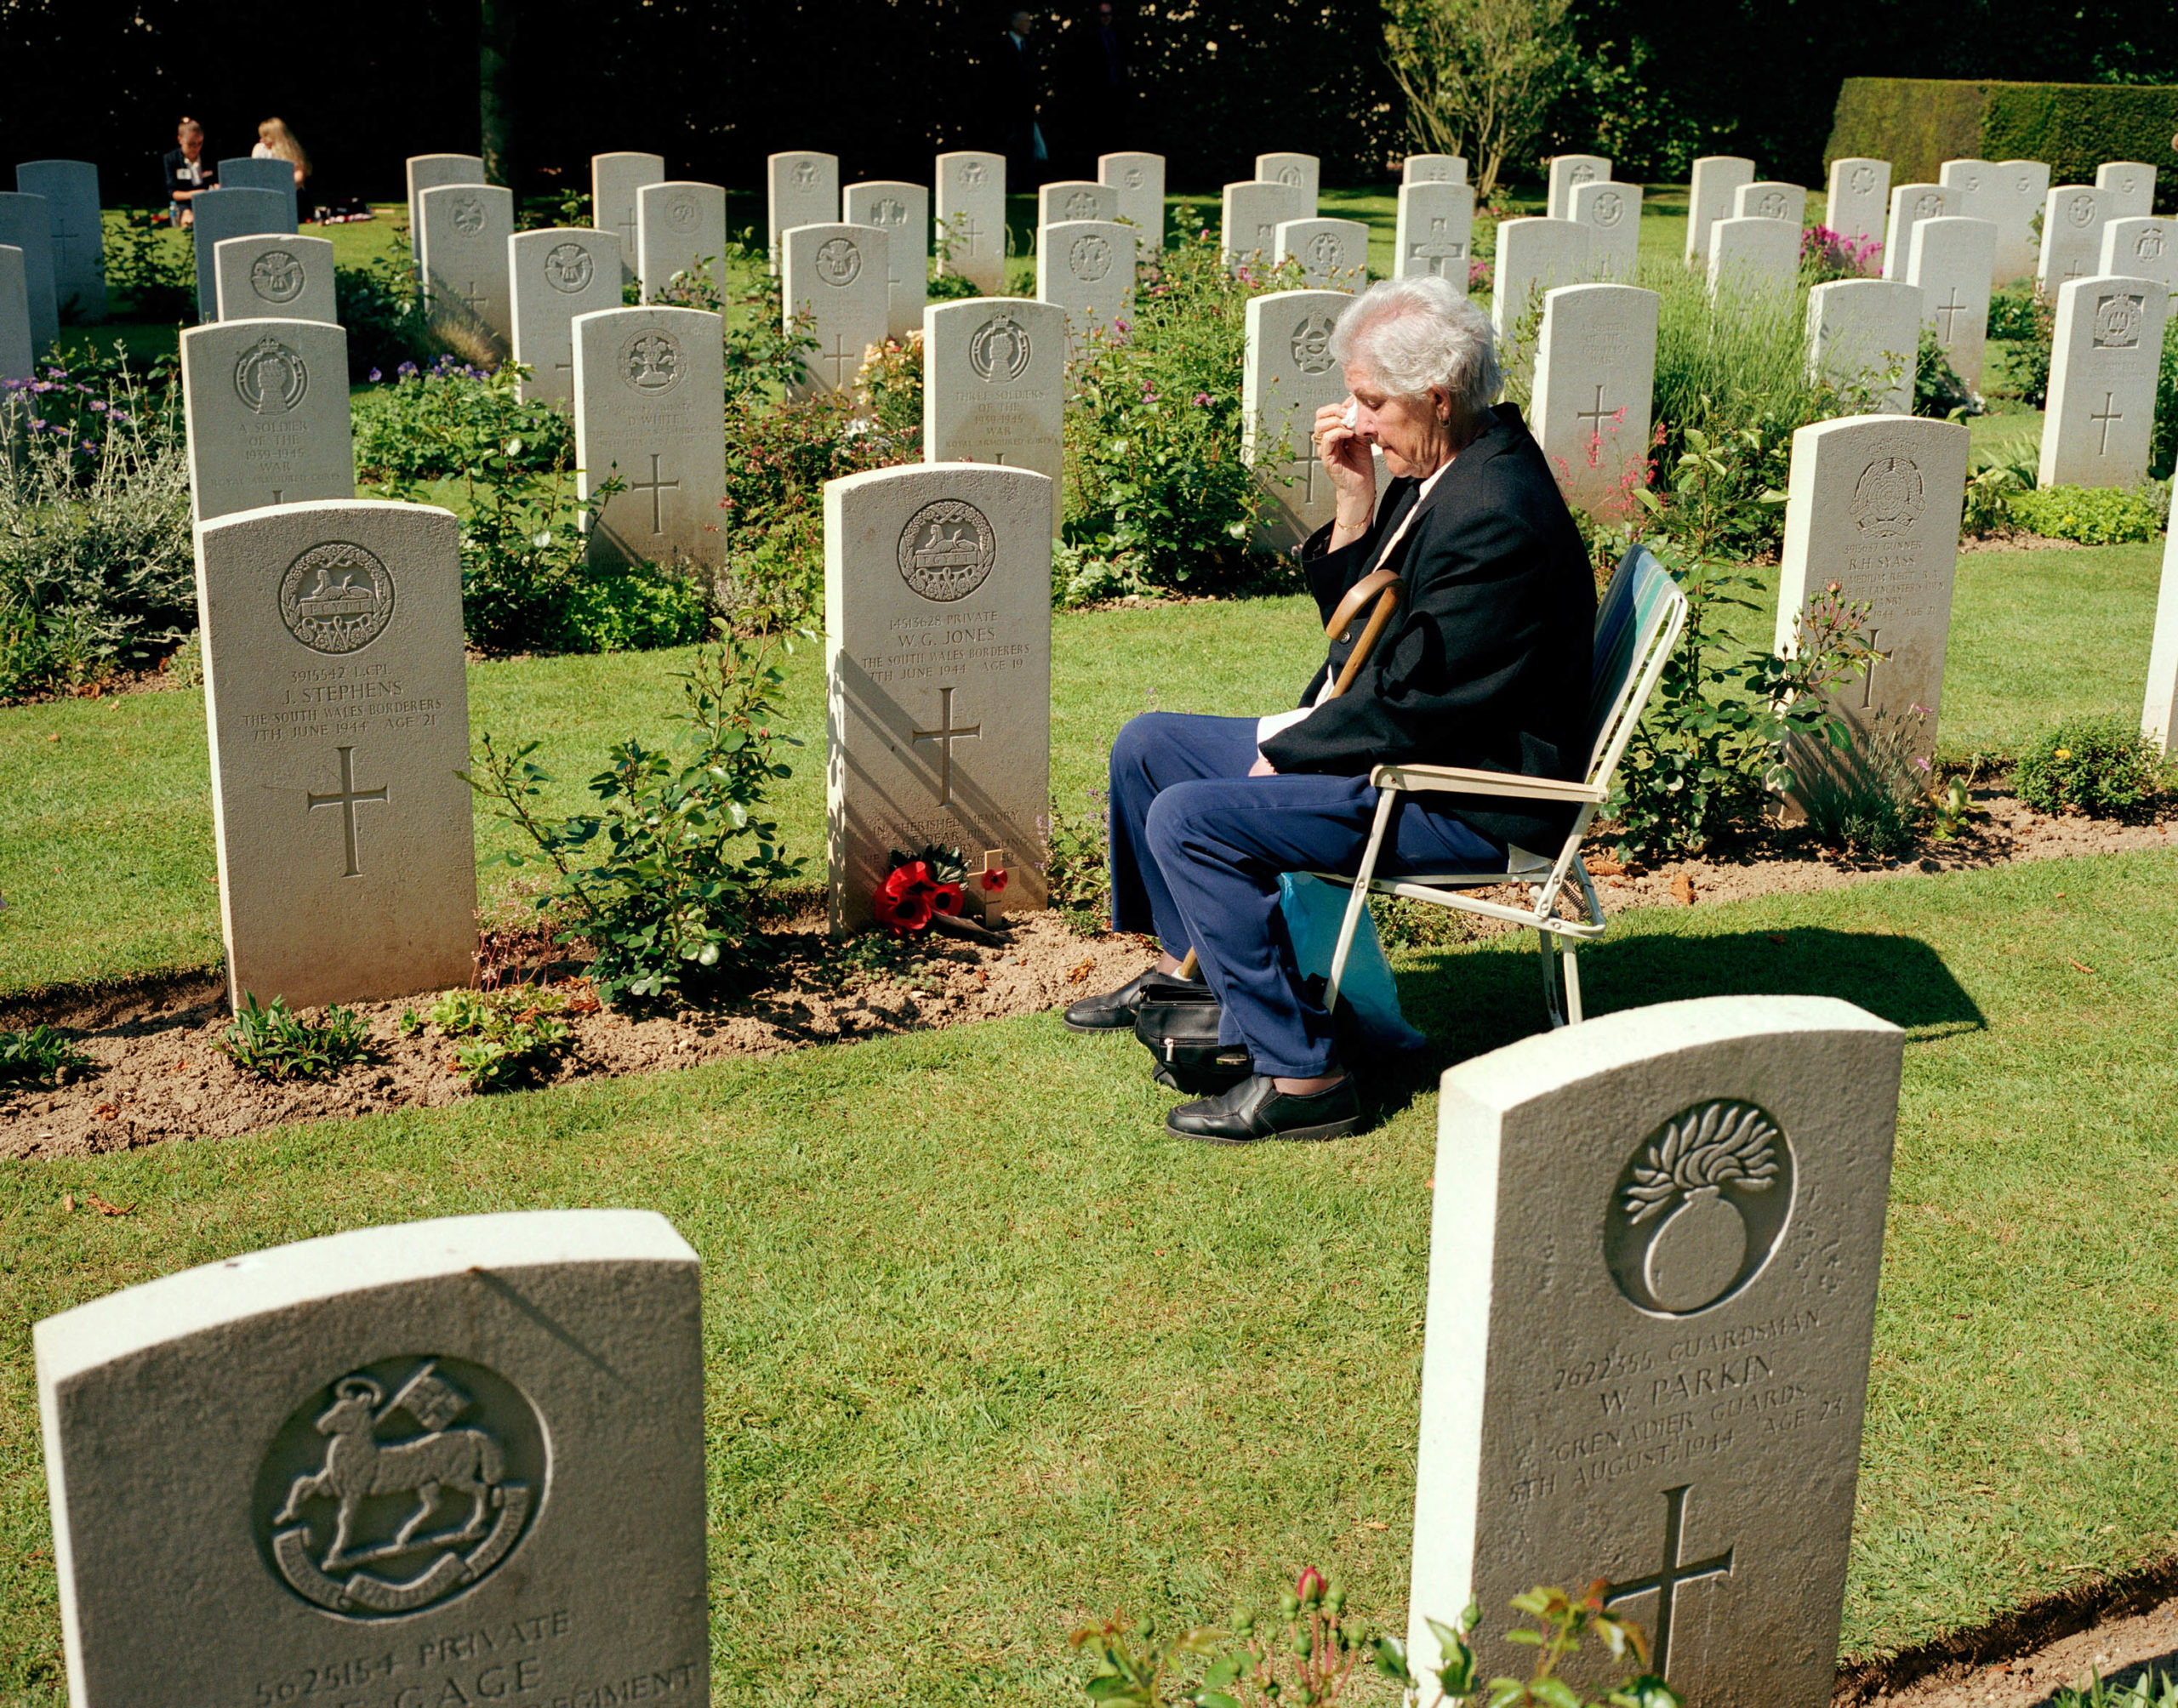 Normandy, Bayeux. D-Day celebrations. At the British war cemetery, a British woman mourns at the grave of her brother, who was killed on 7 June 1944.